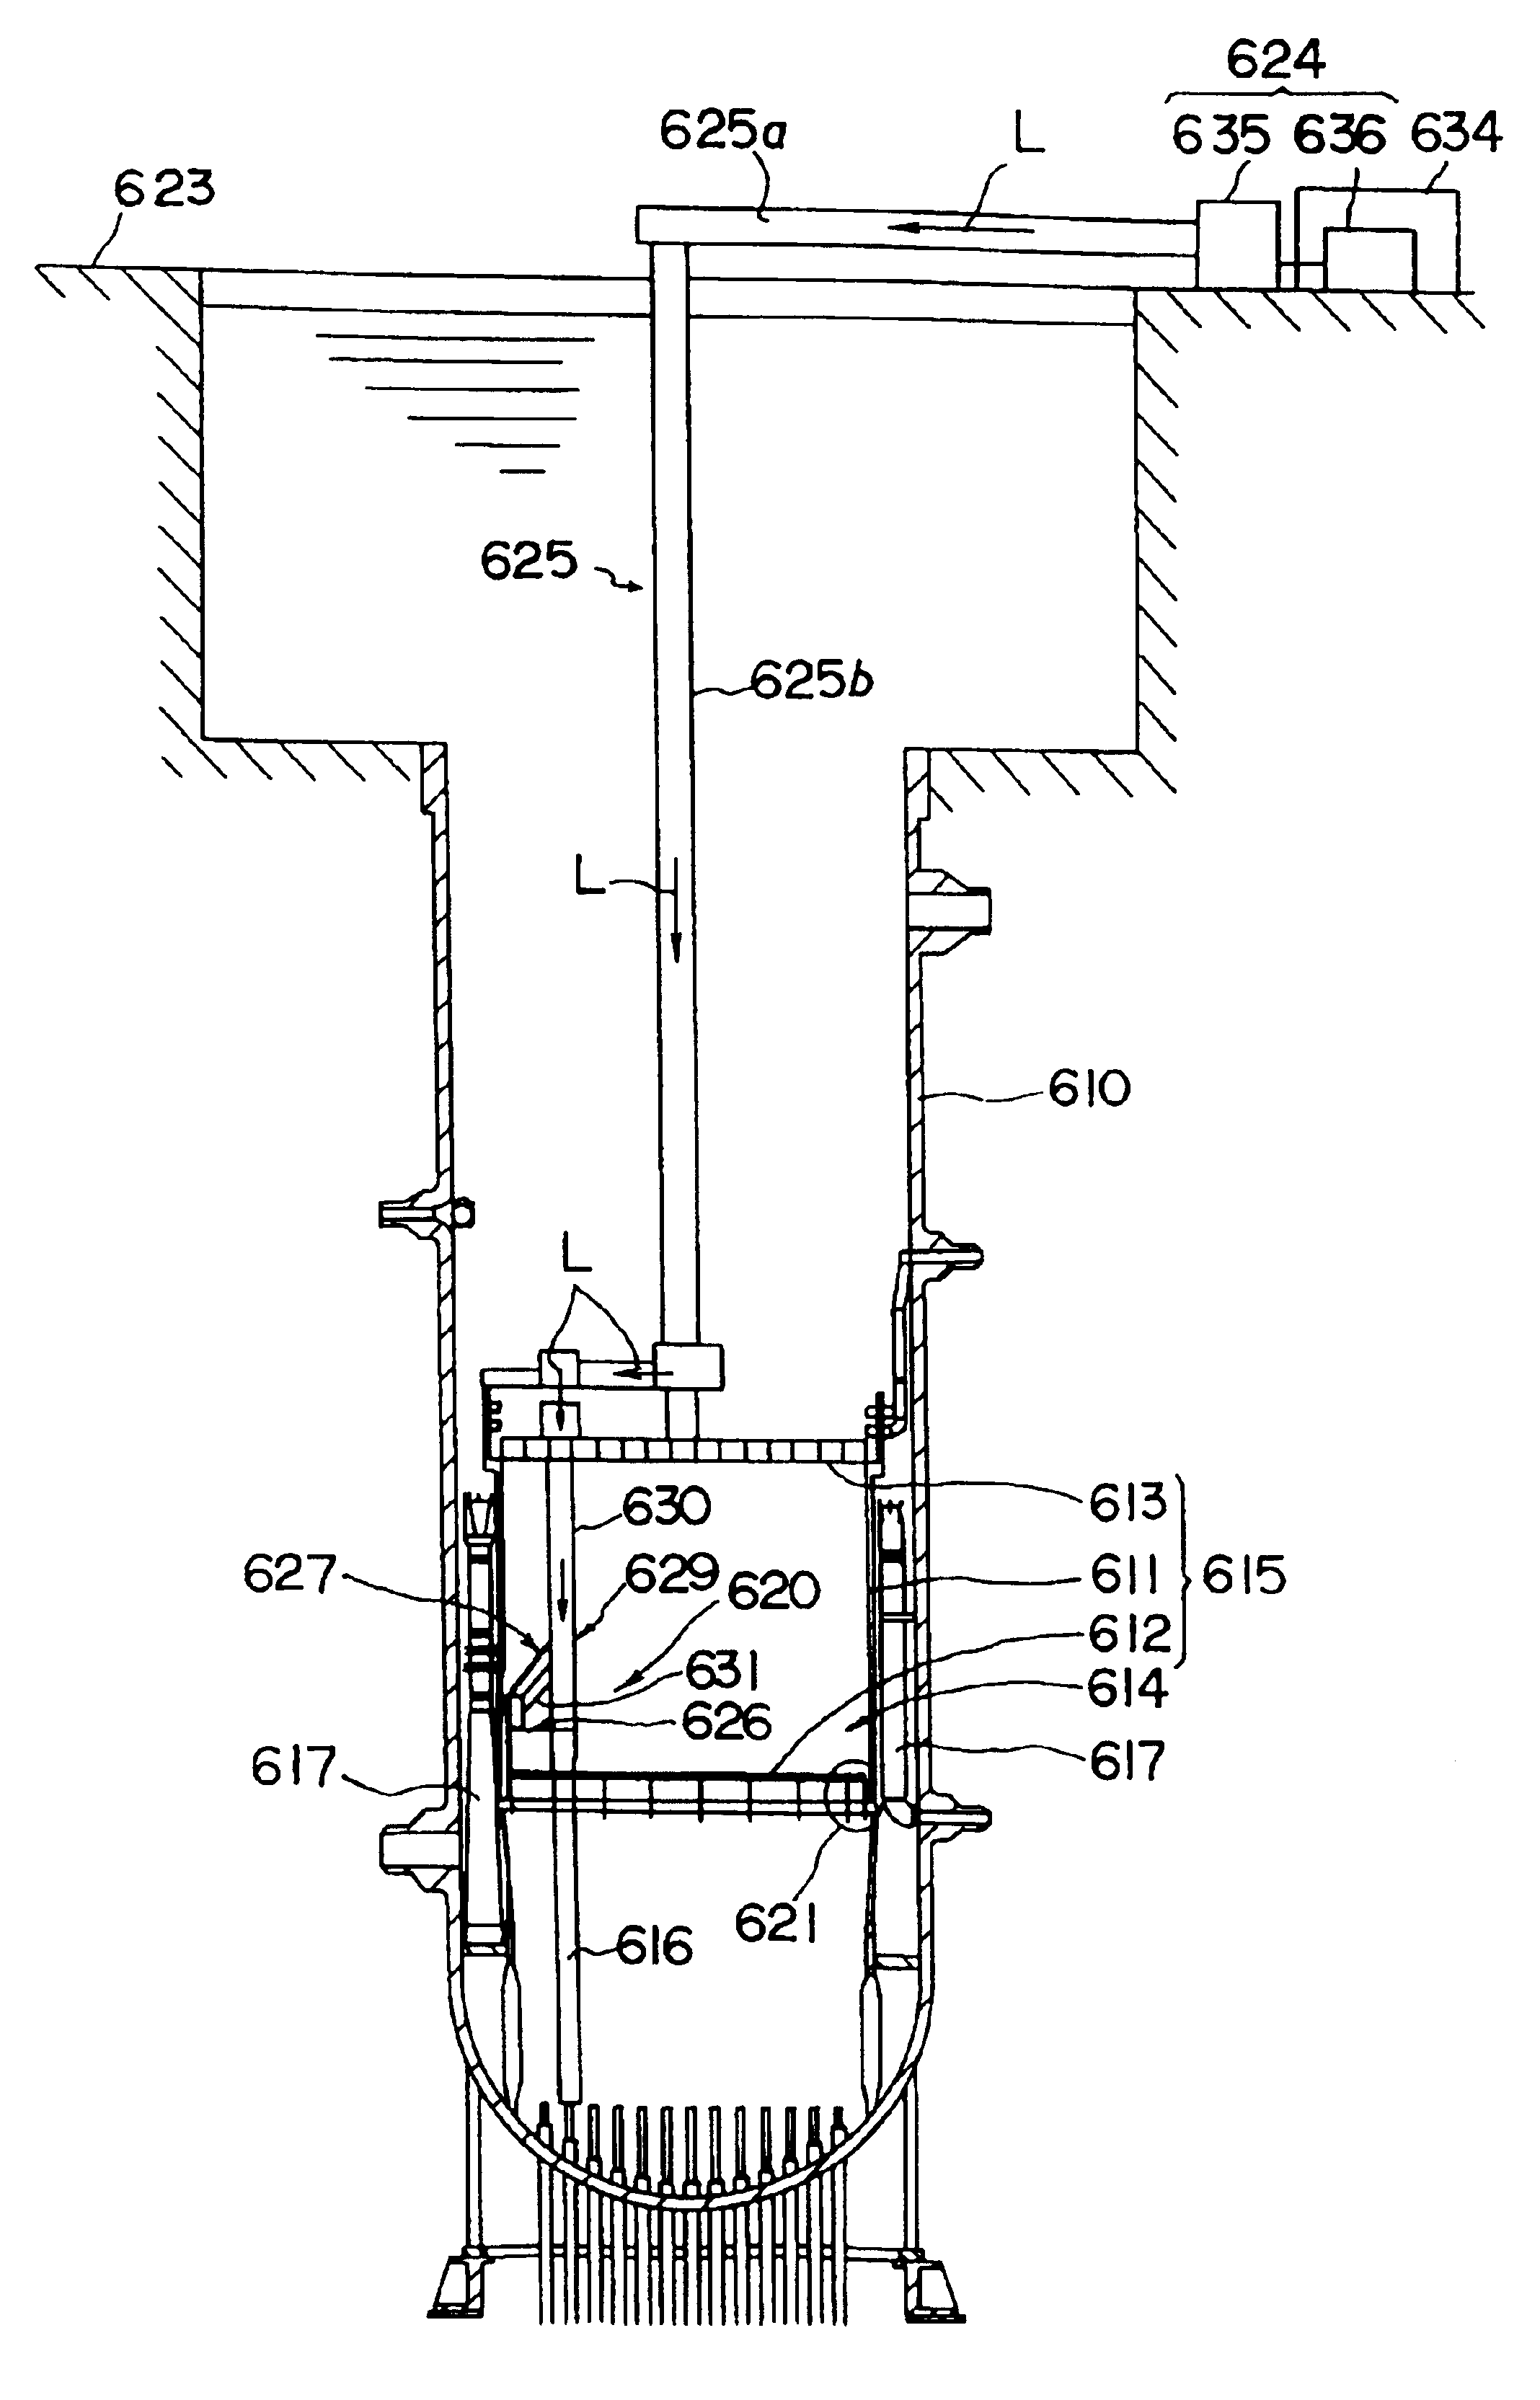 Laser emission head, laser beam transmission device, laser beam transmission device adjustment method and preventive maintenance/repair device of structure in nuclear reactor